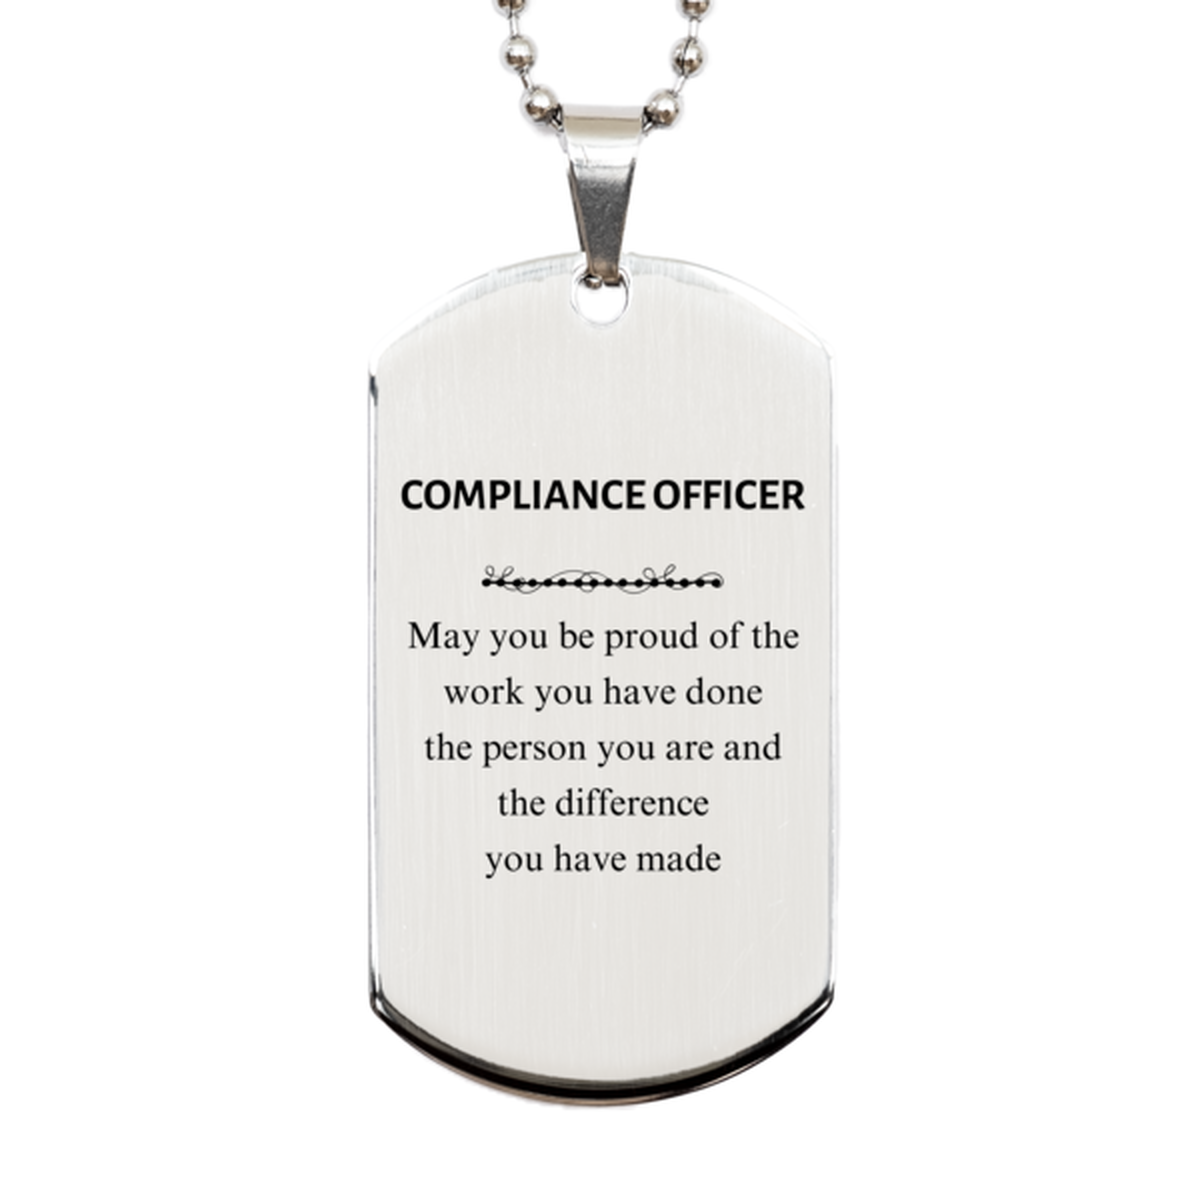 Compliance Officer May you be proud of the work you have done, Retirement Compliance Officer Silver Dog Tag for Colleague Appreciation Gifts Amazing for Compliance Officer